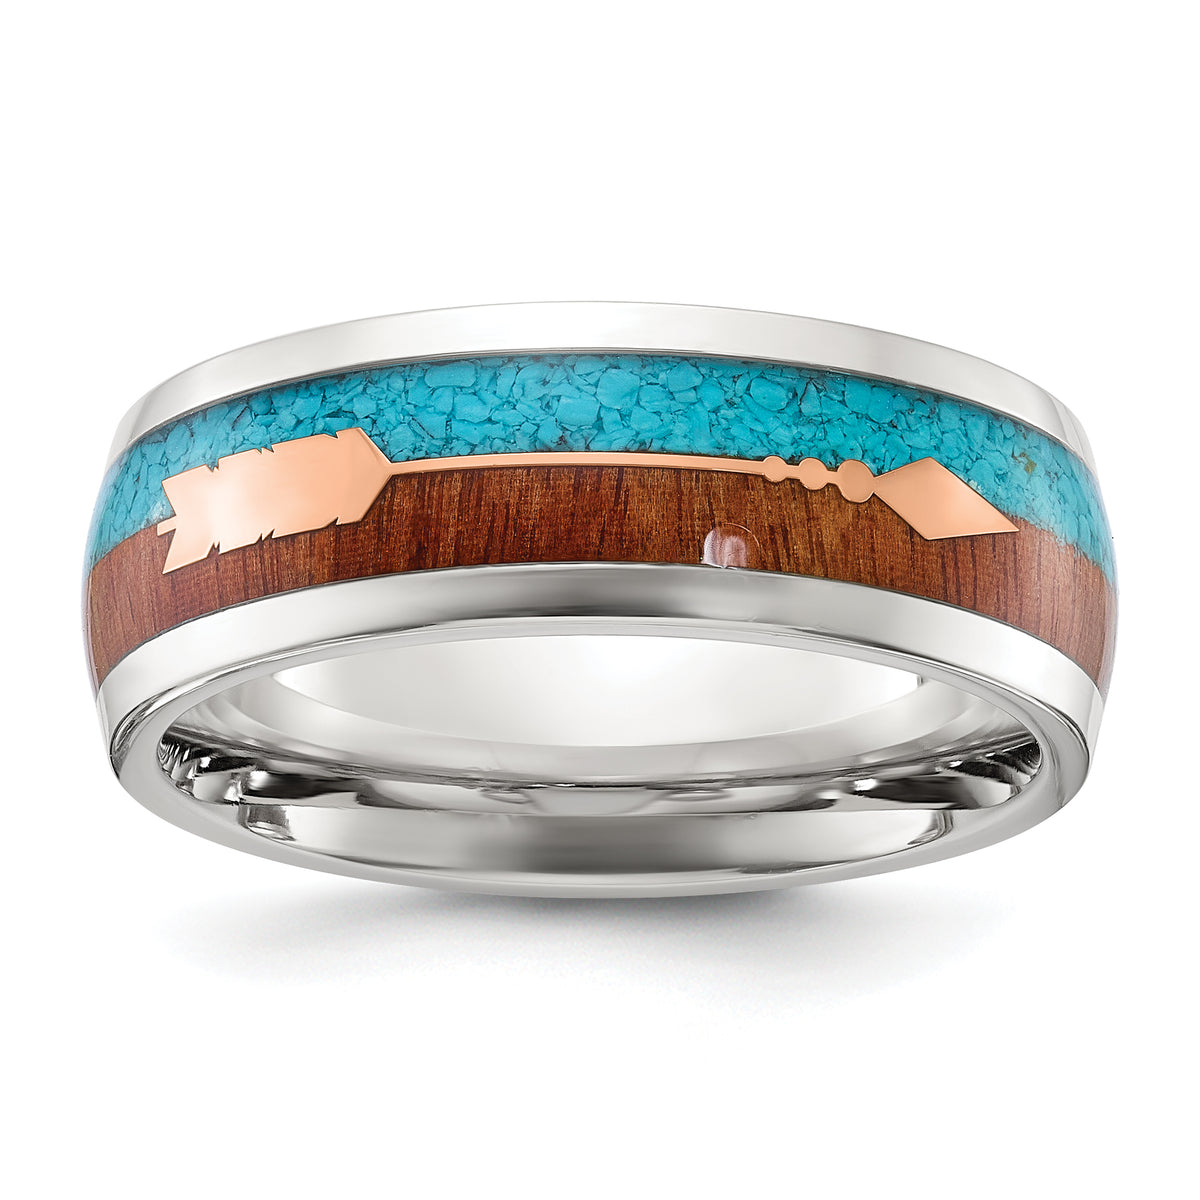 Stainless Steel Polished Arrow with Turquoise and Wood Inlay 8mm Band